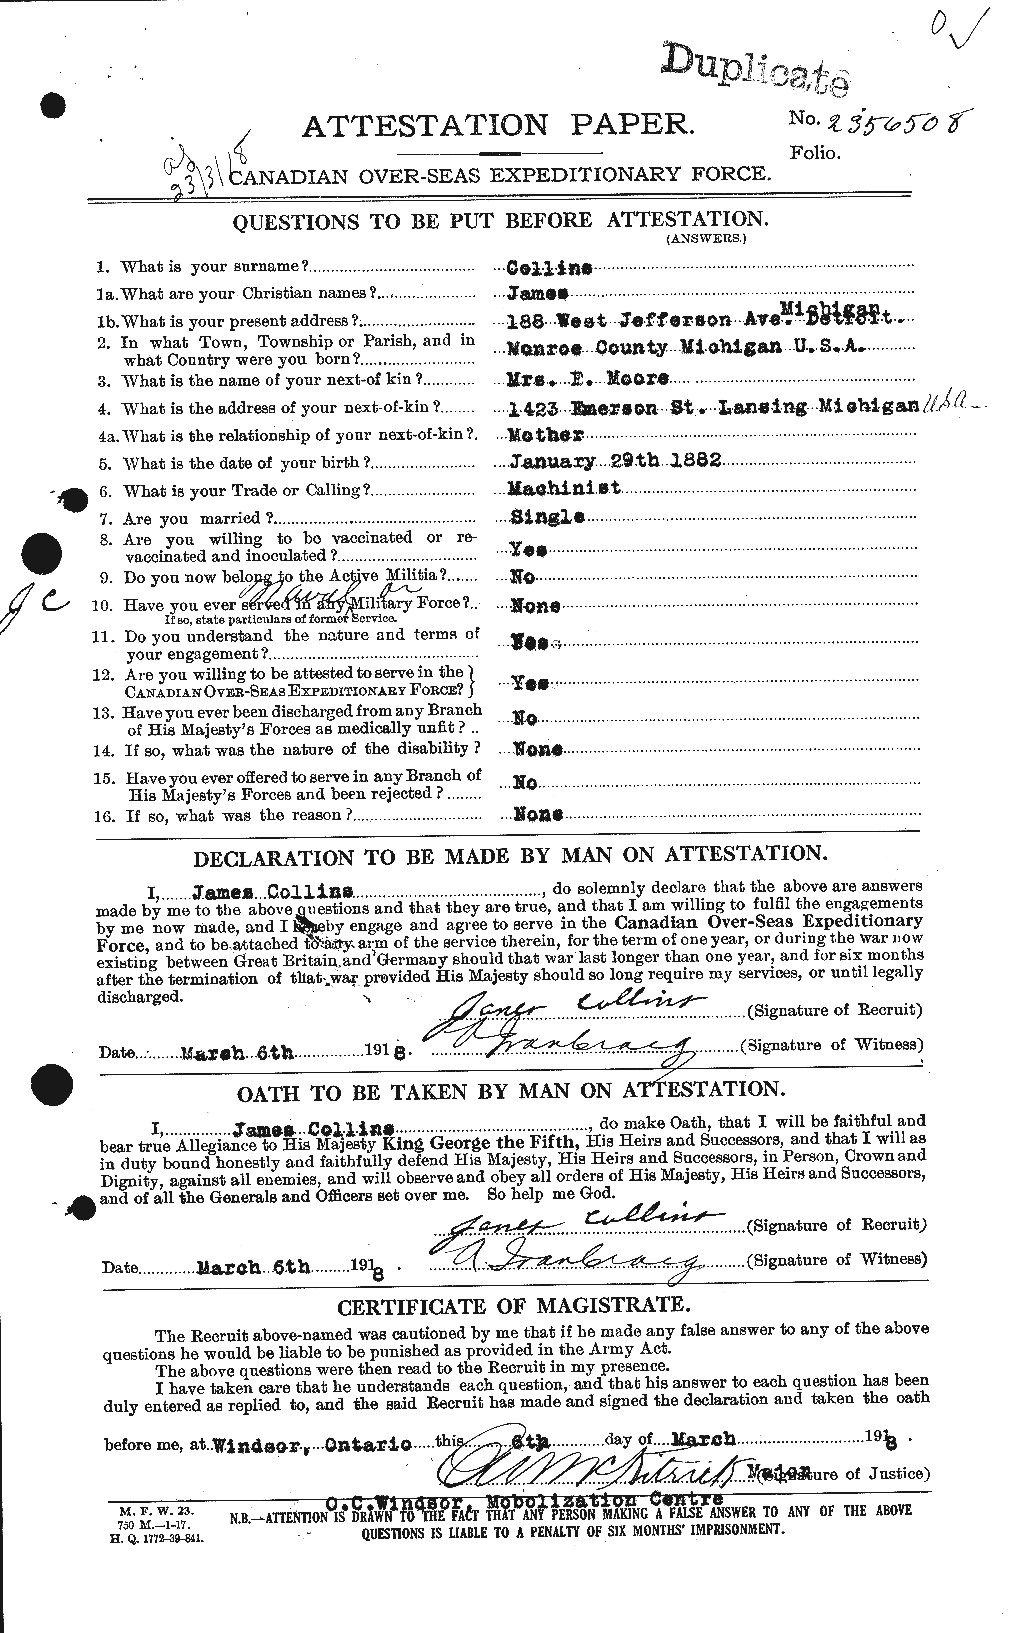 Personnel Records of the First World War - CEF 069963a